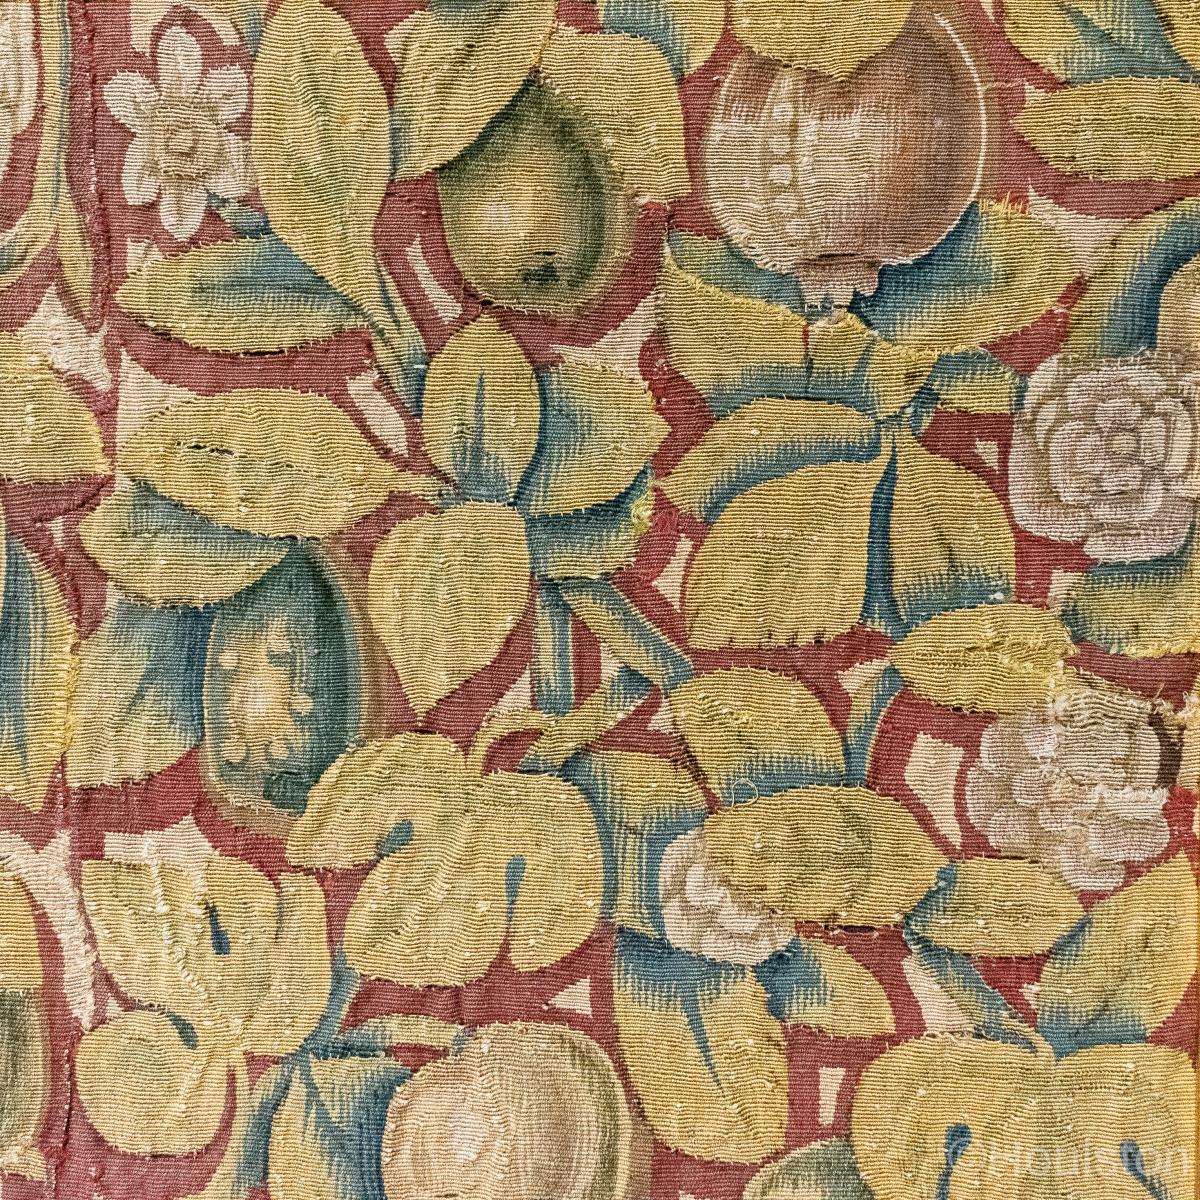 A striking mid-16th century tapestry panel, circa 1530-50